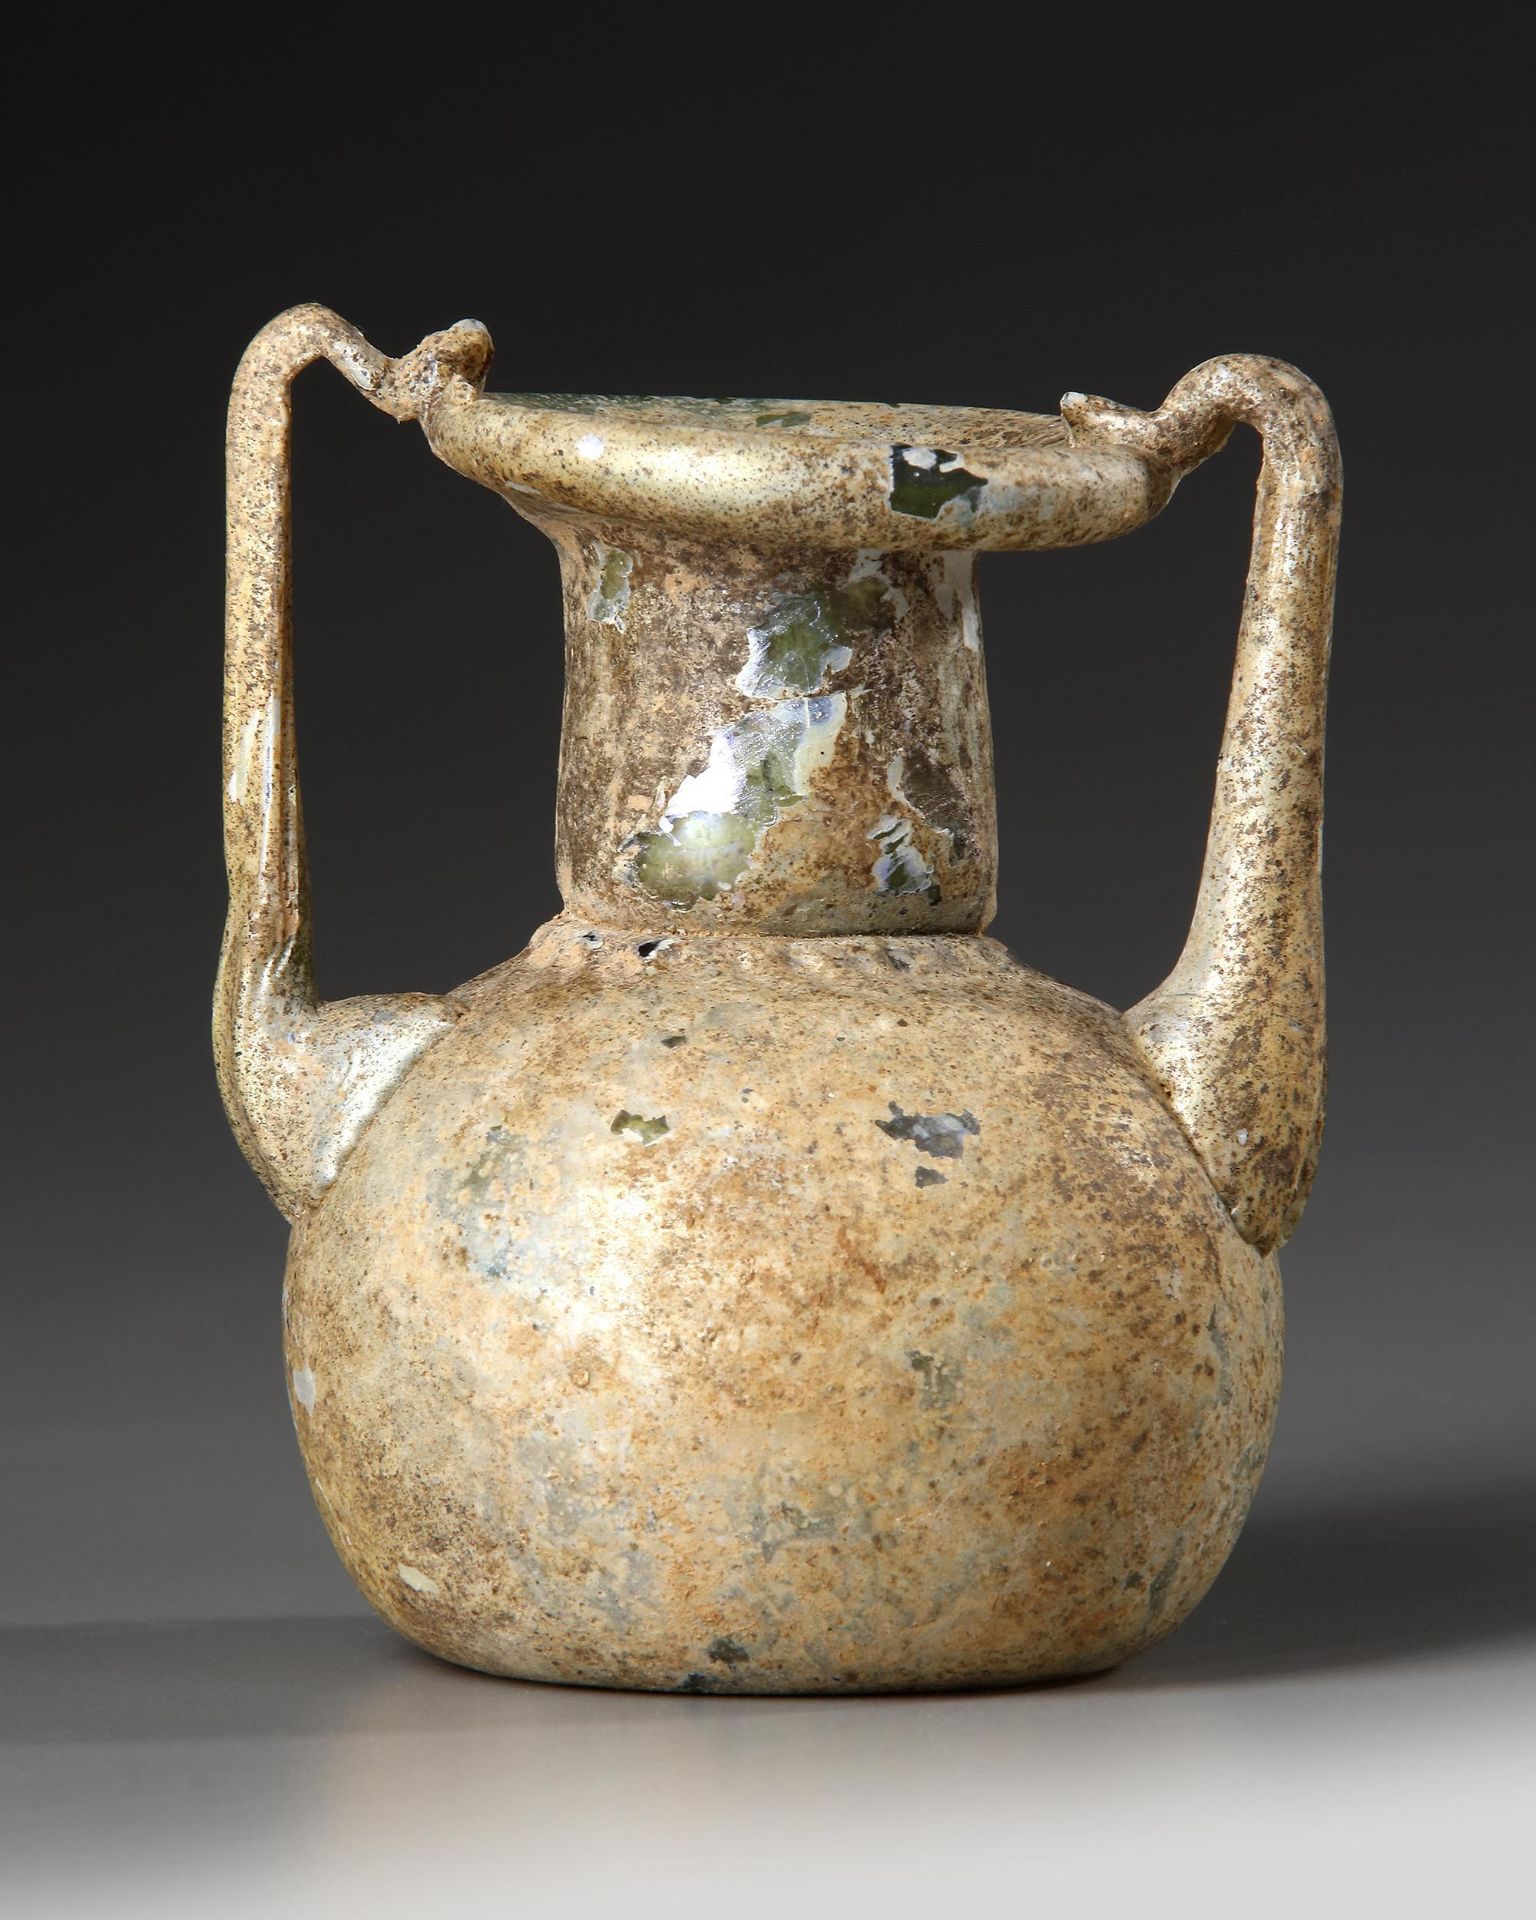 A ROMAN GLASS JAR WITH TWO HANDLES, CIRCA 3RD-4TH CENTURY A.D. - Image 3 of 4